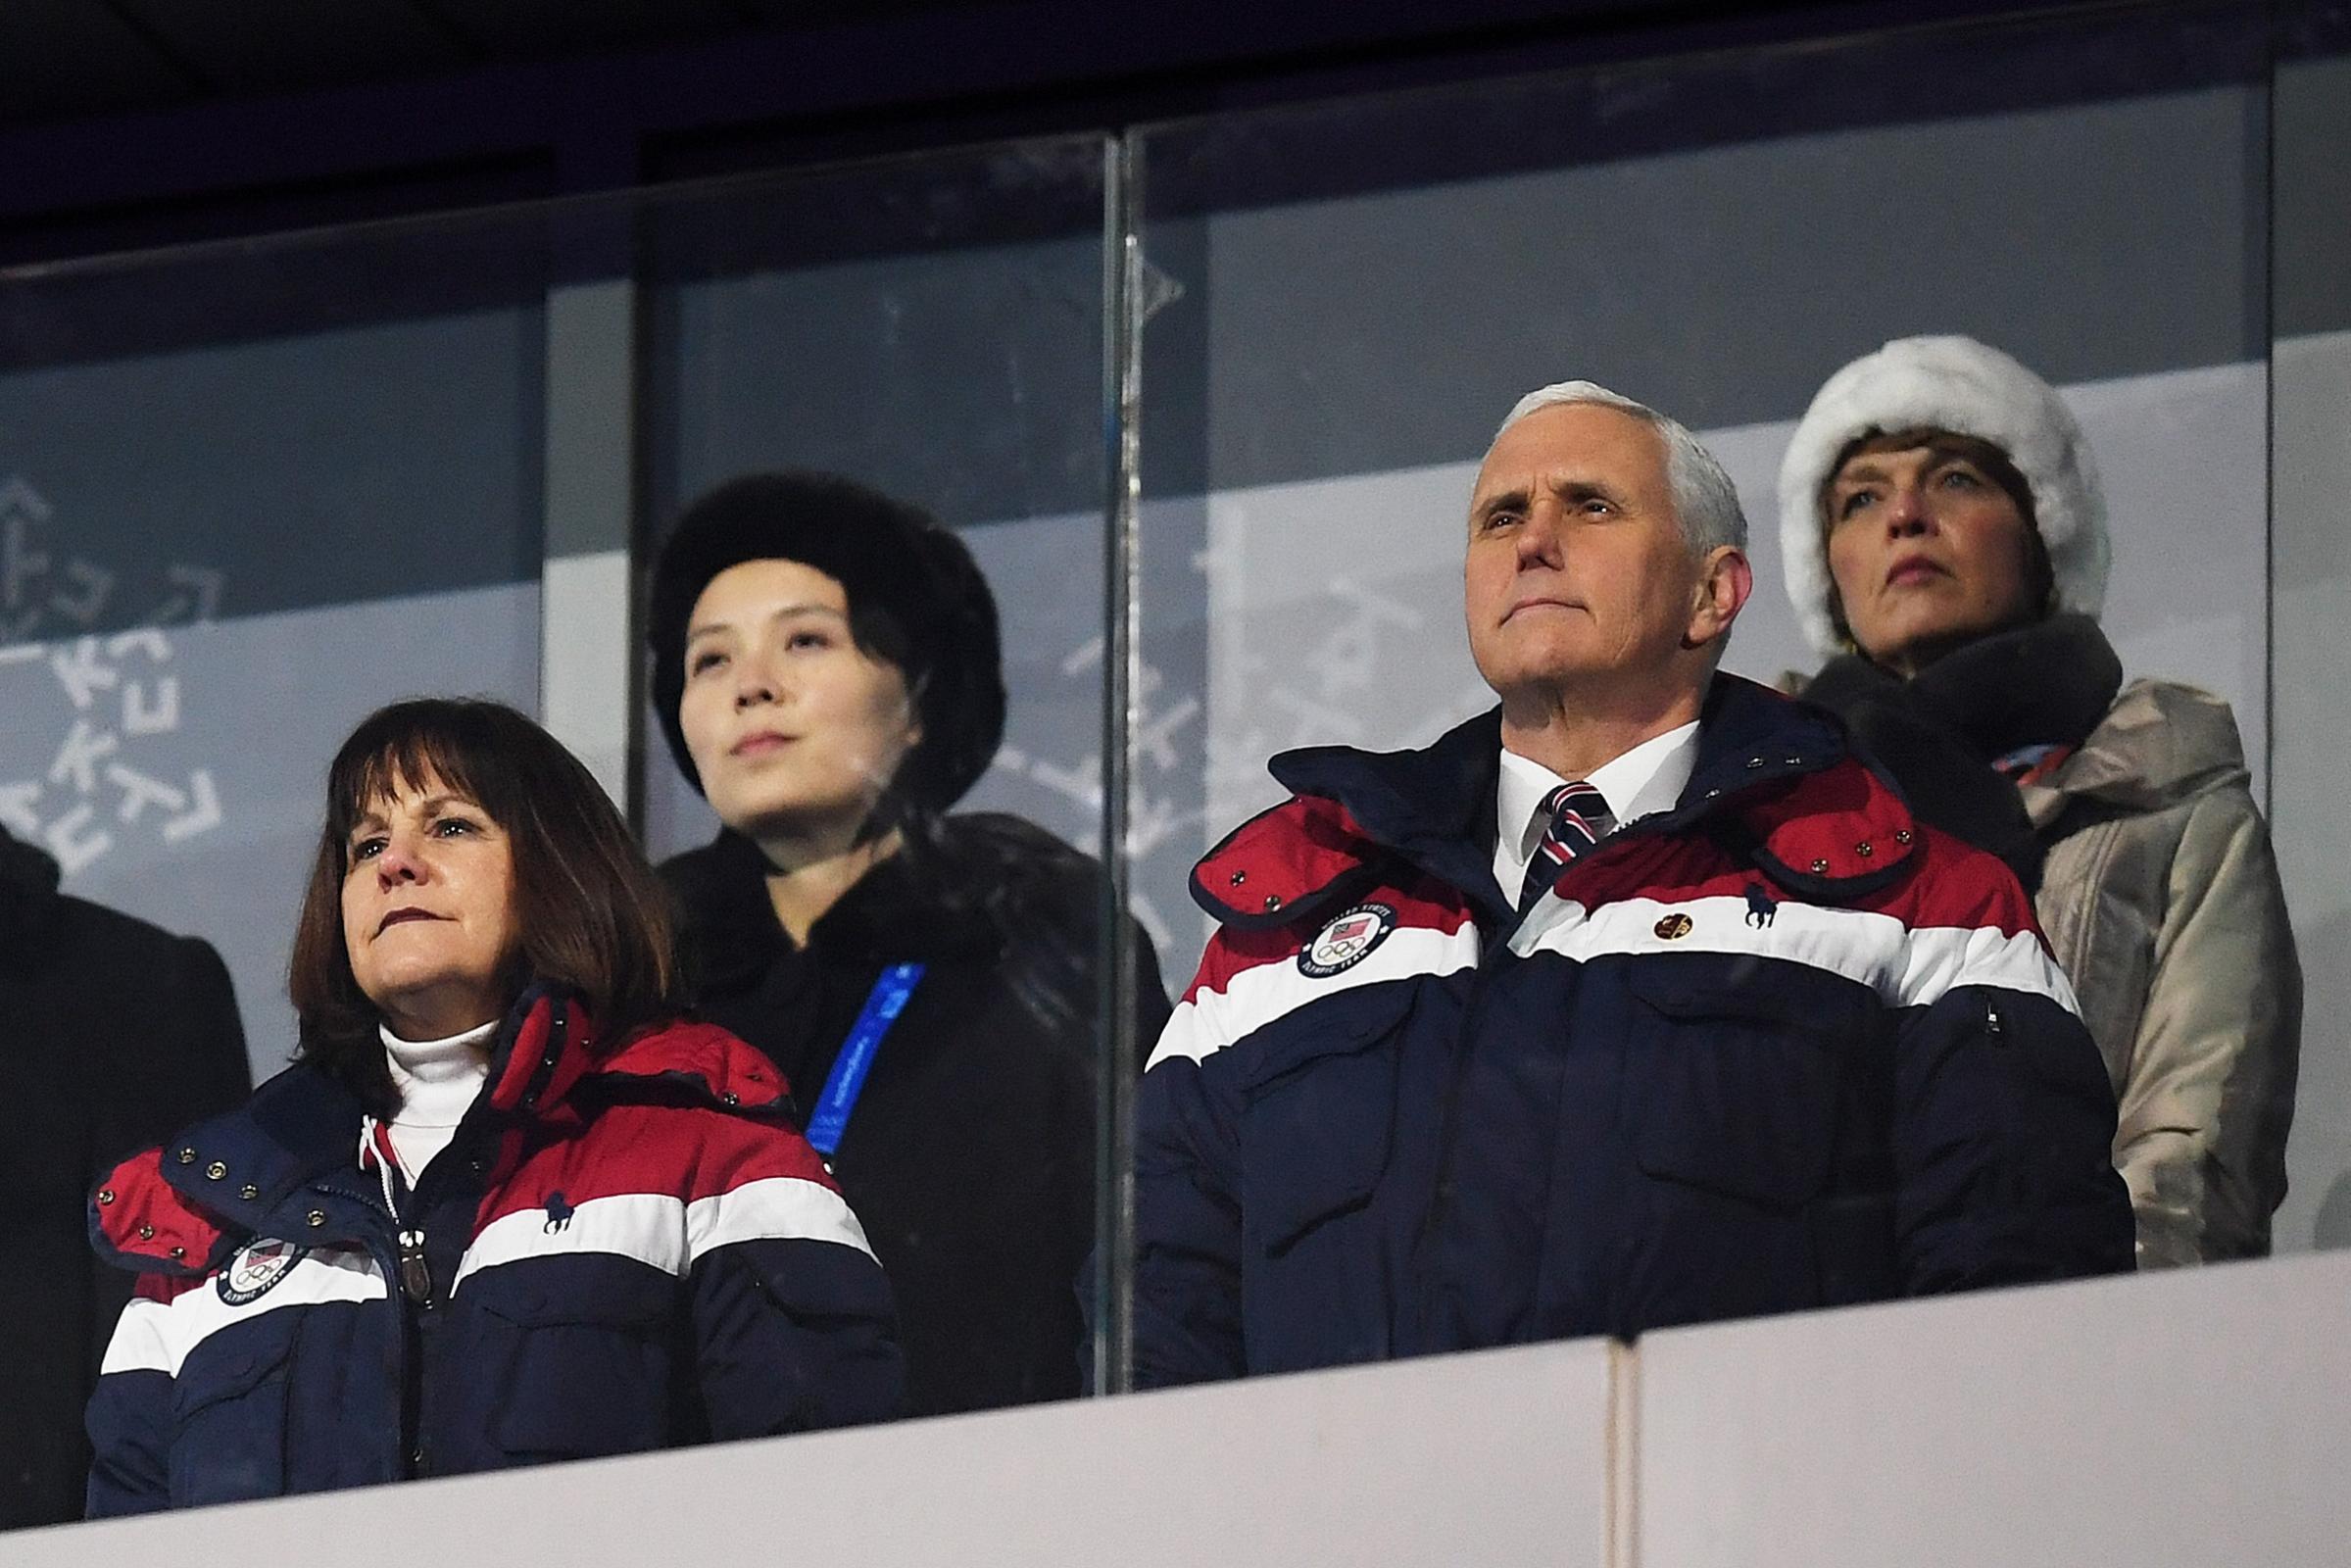 Vice President Mike Pence and his wife Karen watch on during the Opening Ceremony of the PyeongChang 2018 Winter Olympic Games. Behind pence sits Kim Yo-jong (back left), the sister of North Korean leader Kim Jong-Un, at PyeongChang Olympic Stadium in South Korea on Feb. 9, 2018.